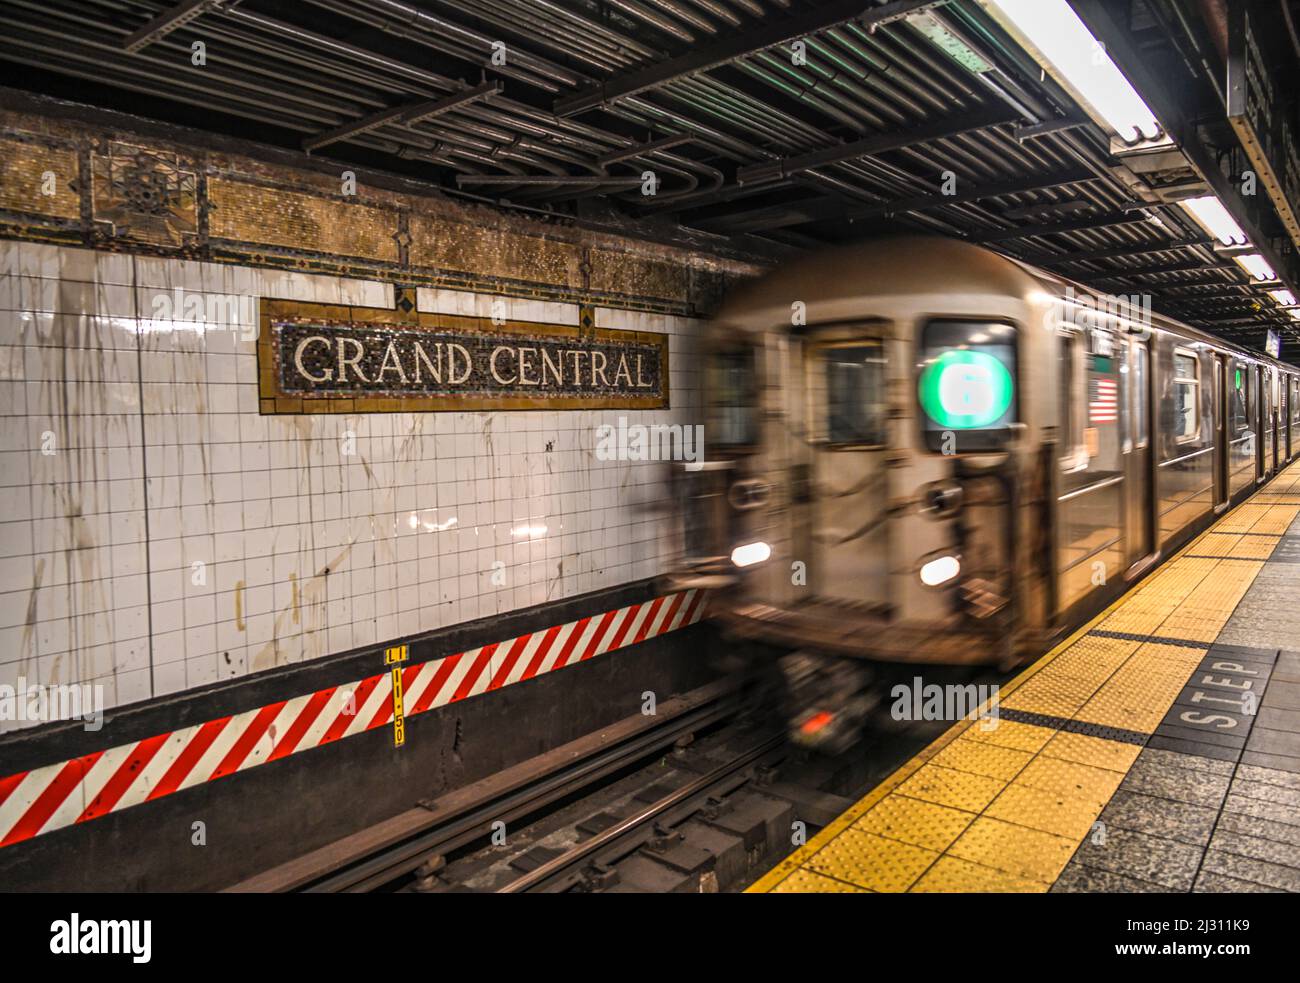 subway train at the Grand Central station in New York City Stock Photo